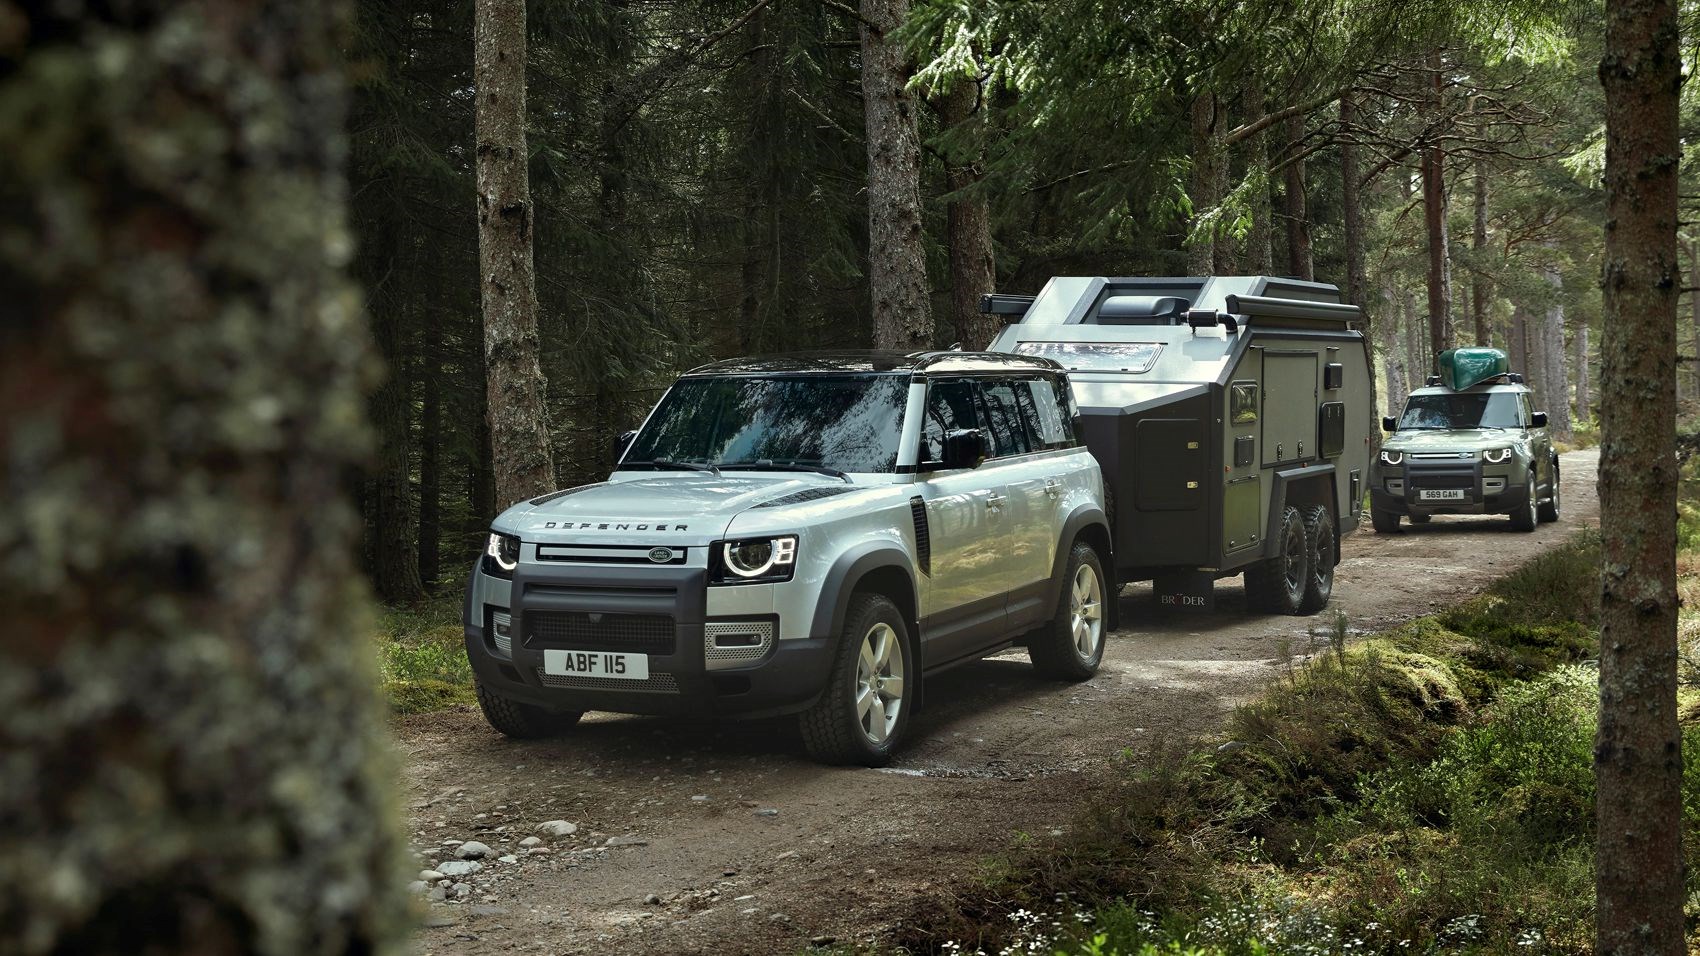 Range Rover Defender Weight  : Defender Can Handle Extreme Terrains And Confidently Takes You From The Urban Jungle, To Shifting Sands And Icy Environments.